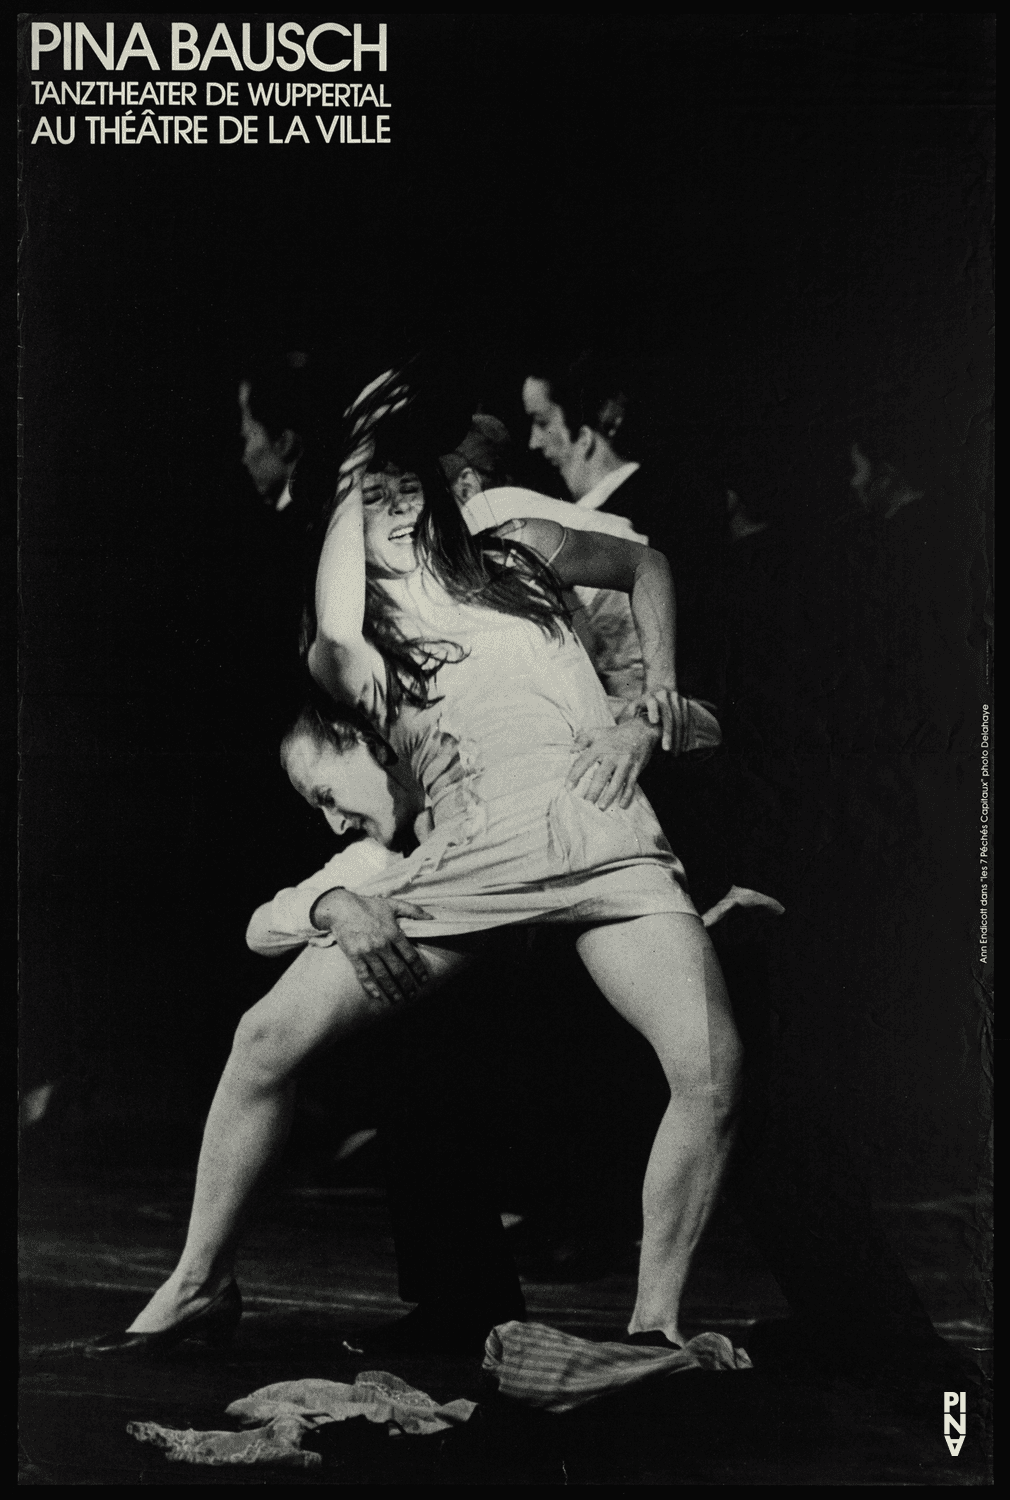 Poster for “The Seven Deadly Sins” by Pina Bausch (in Paris)